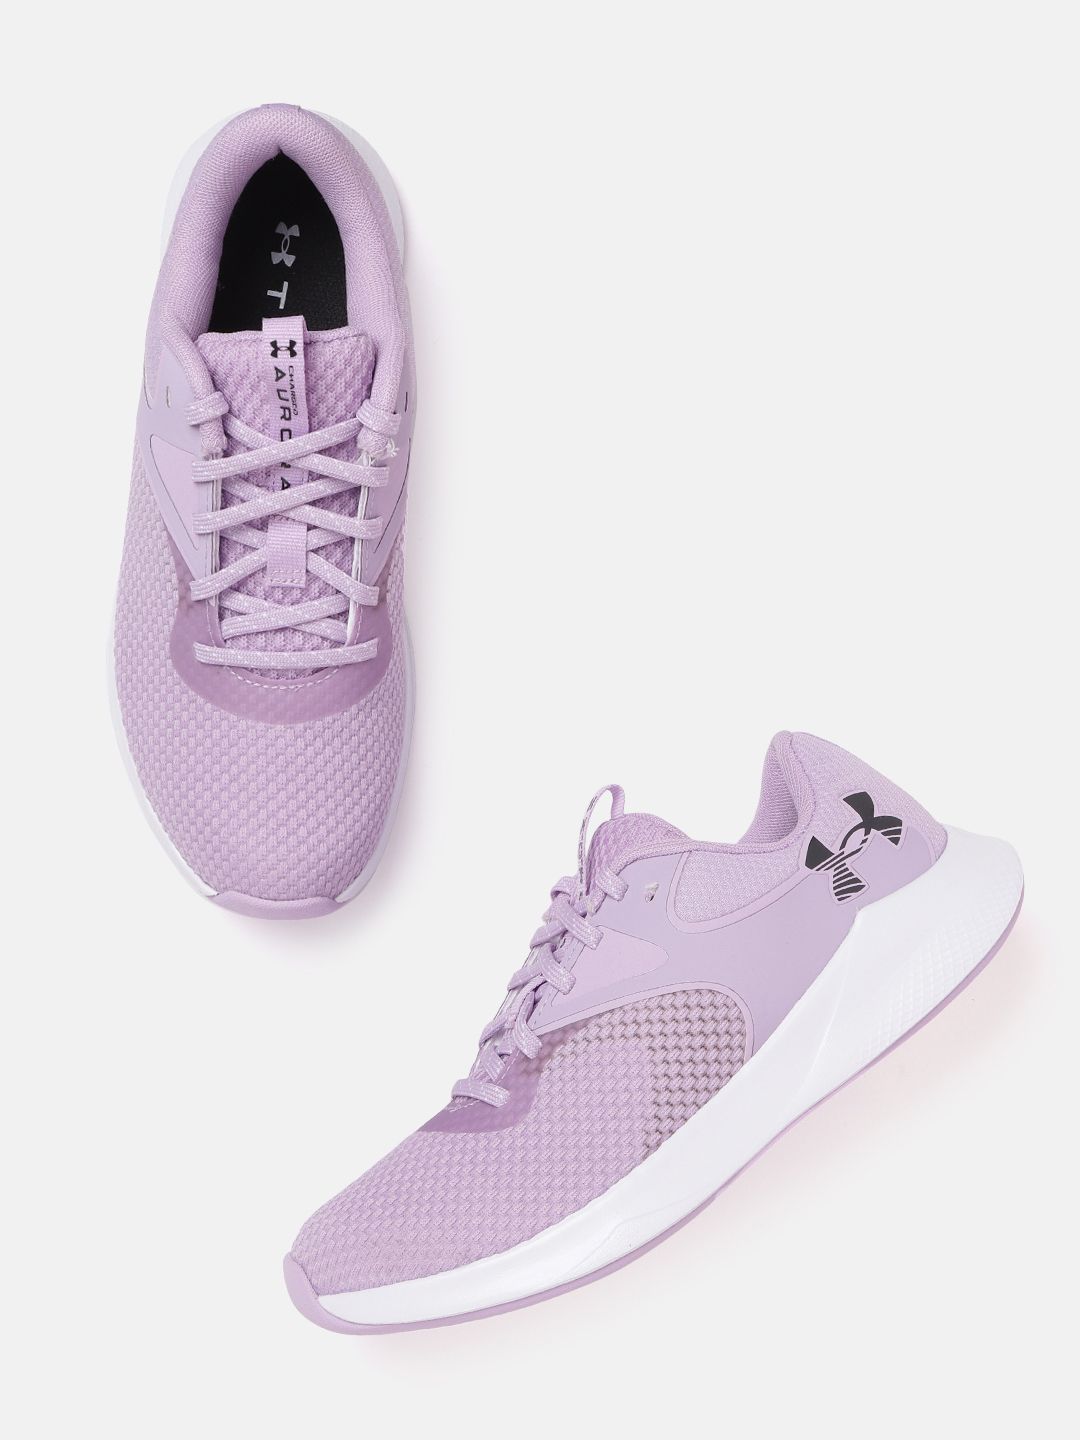 UNDER ARMOUR Women Lavender Solid Woven Design Charged Aurora 2 Training Shoes Price in India